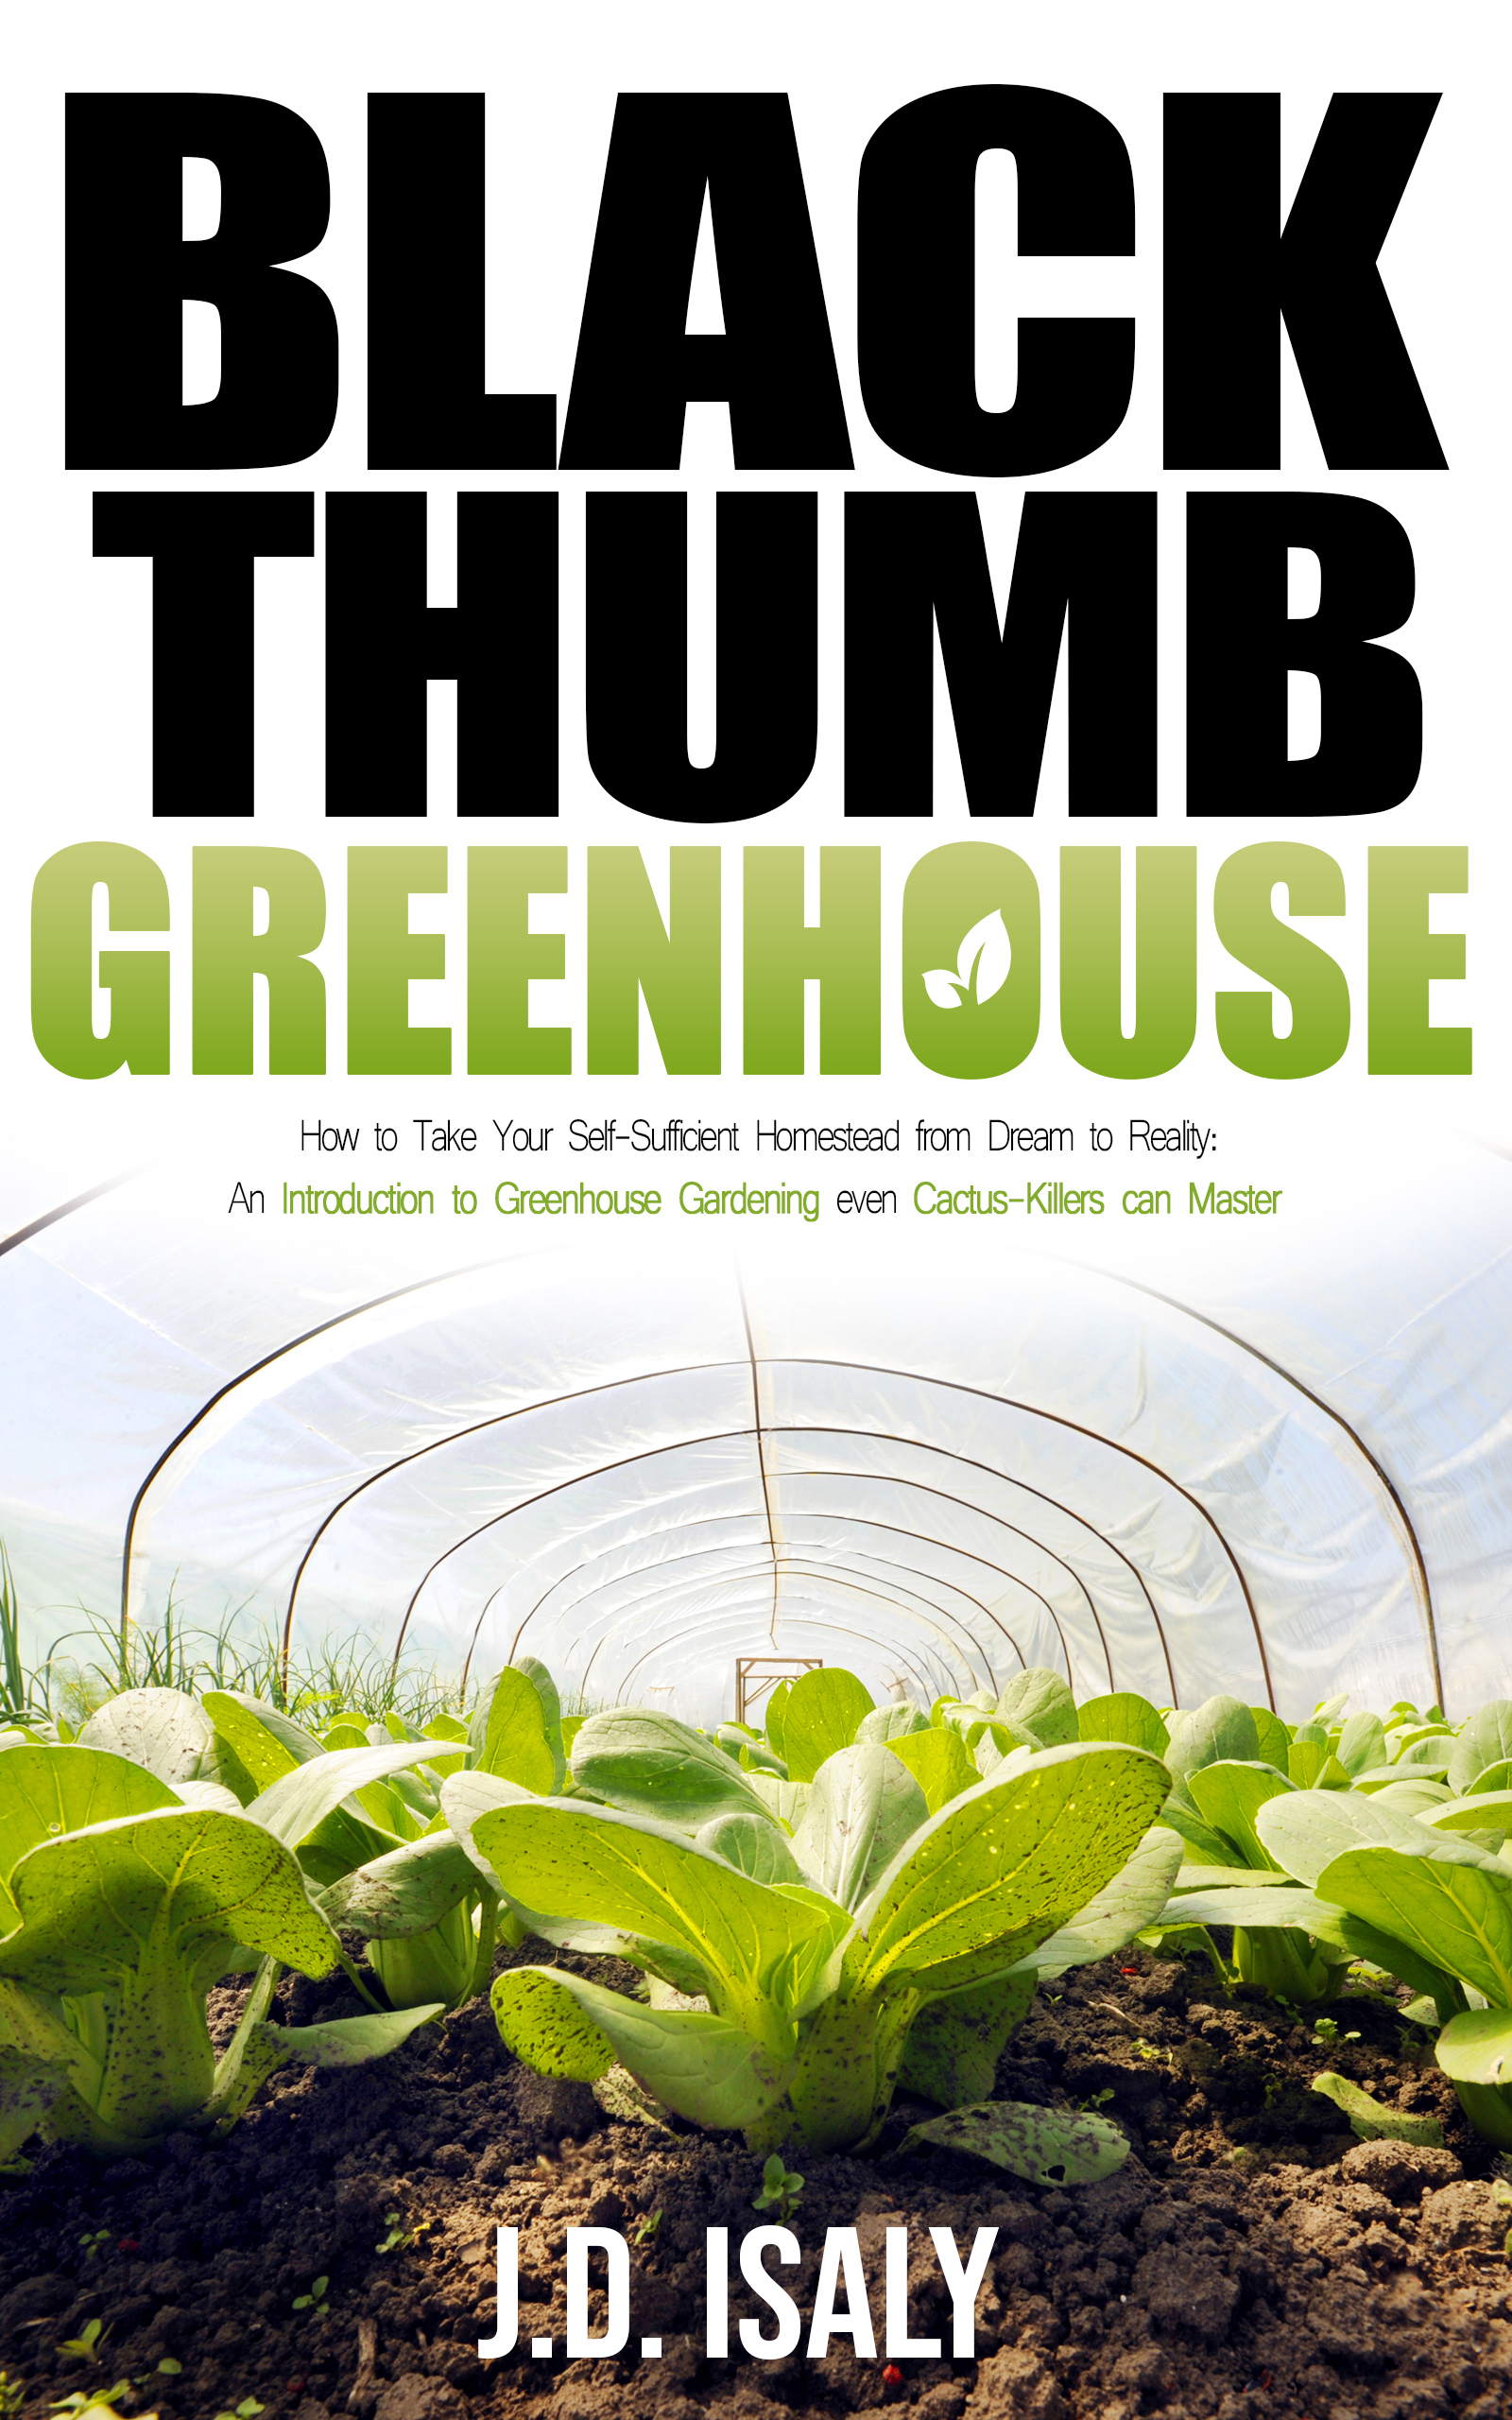 FREE: Black Thumb Greenhouse: How to Take Your Self-Sufficient Homestead from Dream to Reality – An Introduction to Greenhouse Gardening Even Cactus-Killers Can Complete by J.D. Isaly